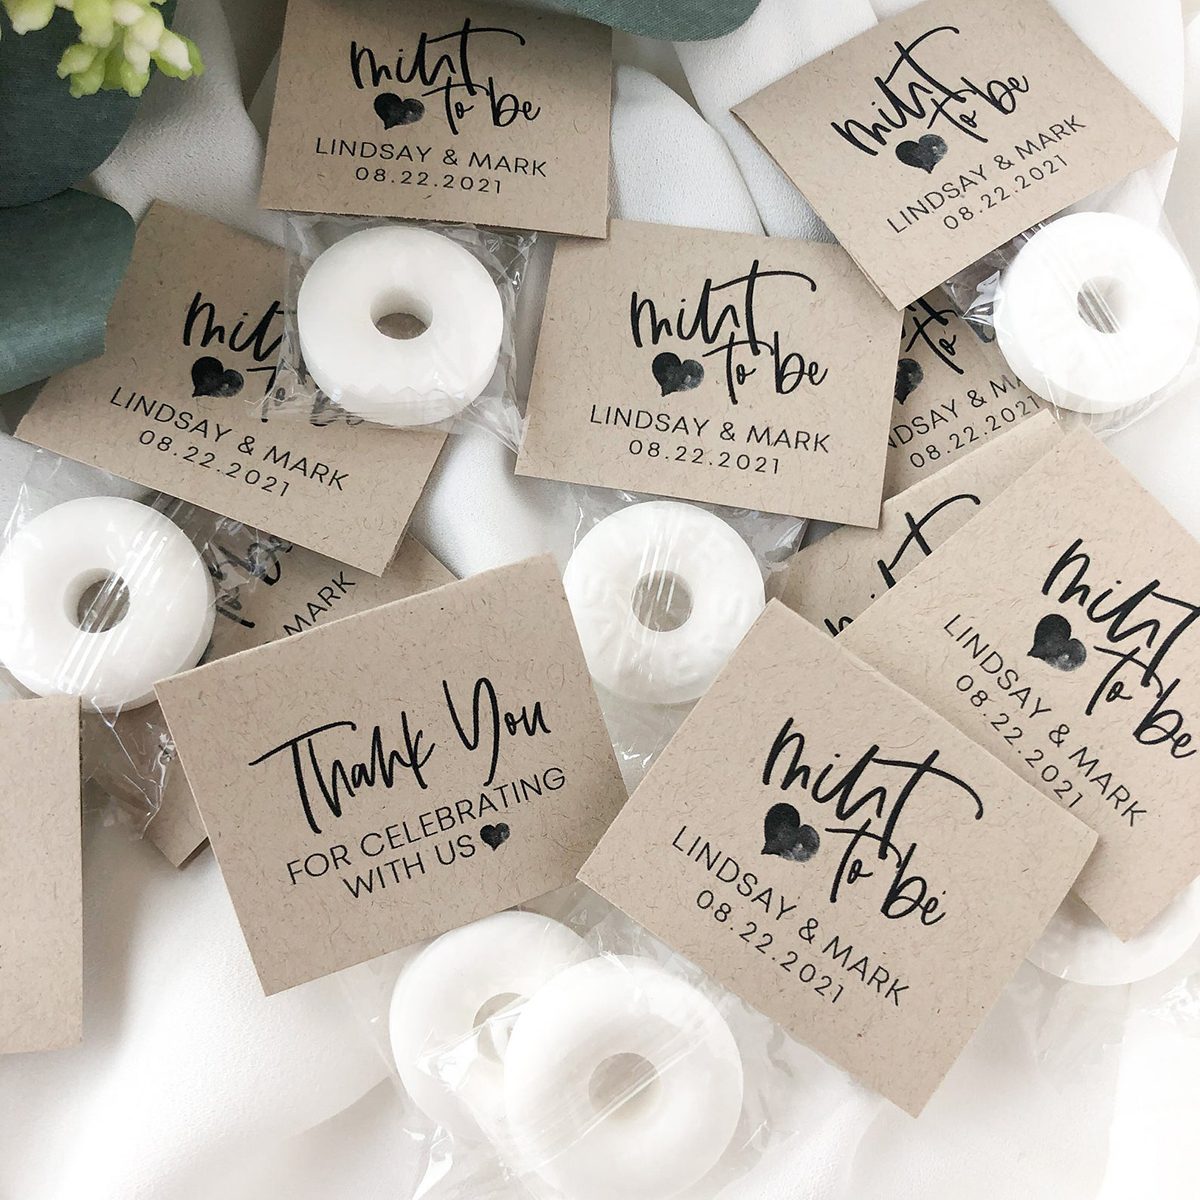 Wedding favours: The ultimate guide to choosing gifts for your guests |  HELLO!